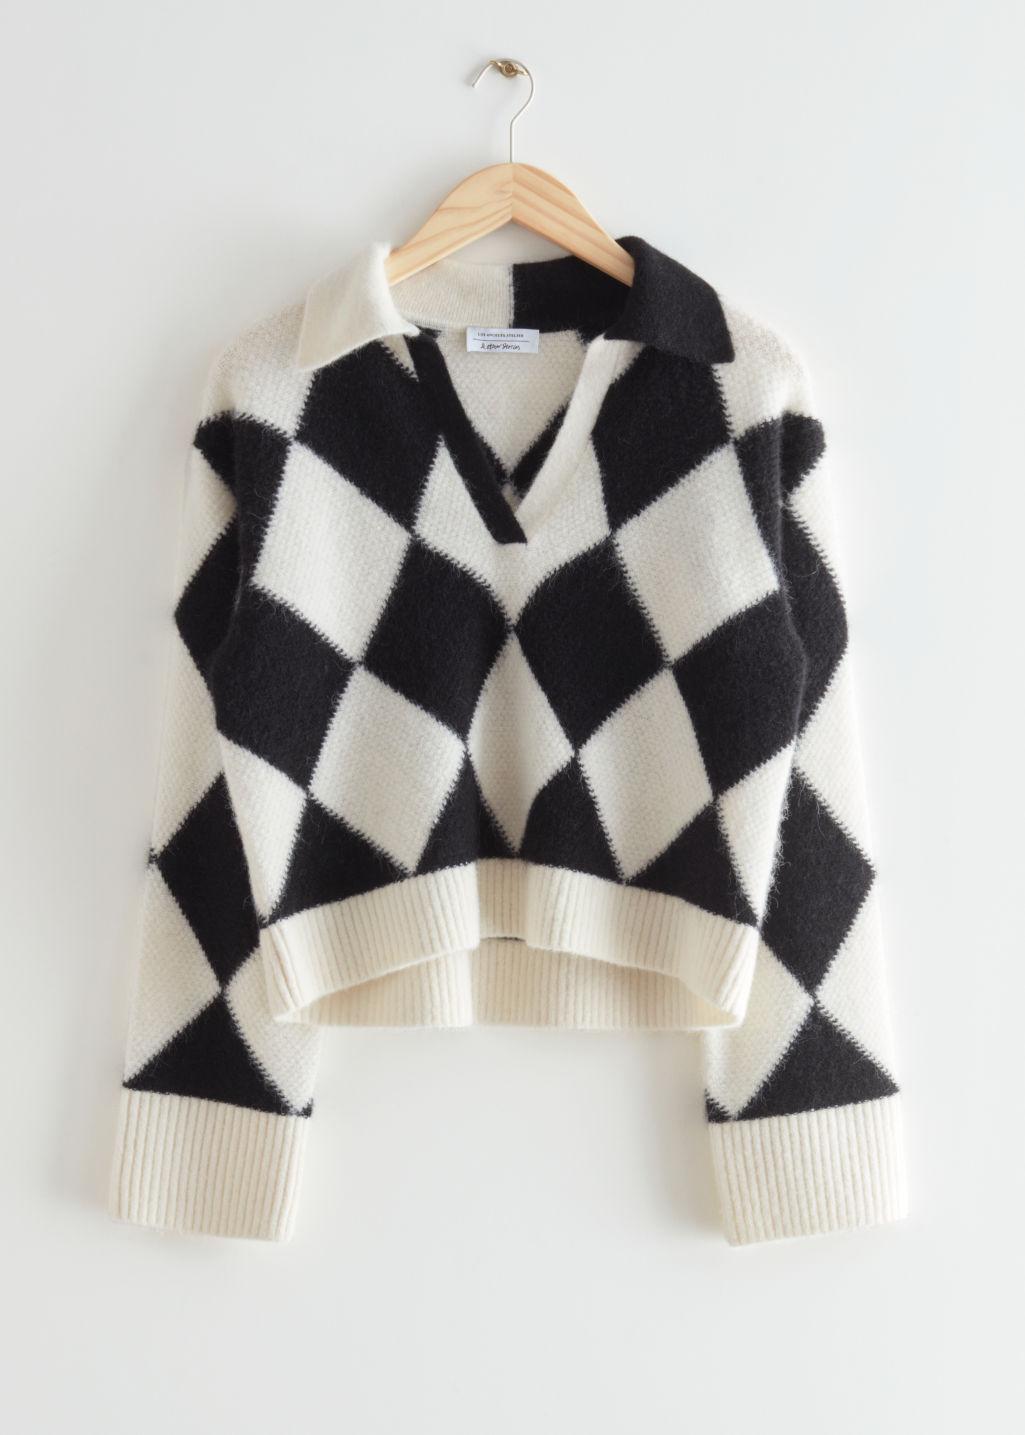 & Other Stories Checkered Jacquard Knit Sweater in White | Lyst Canada